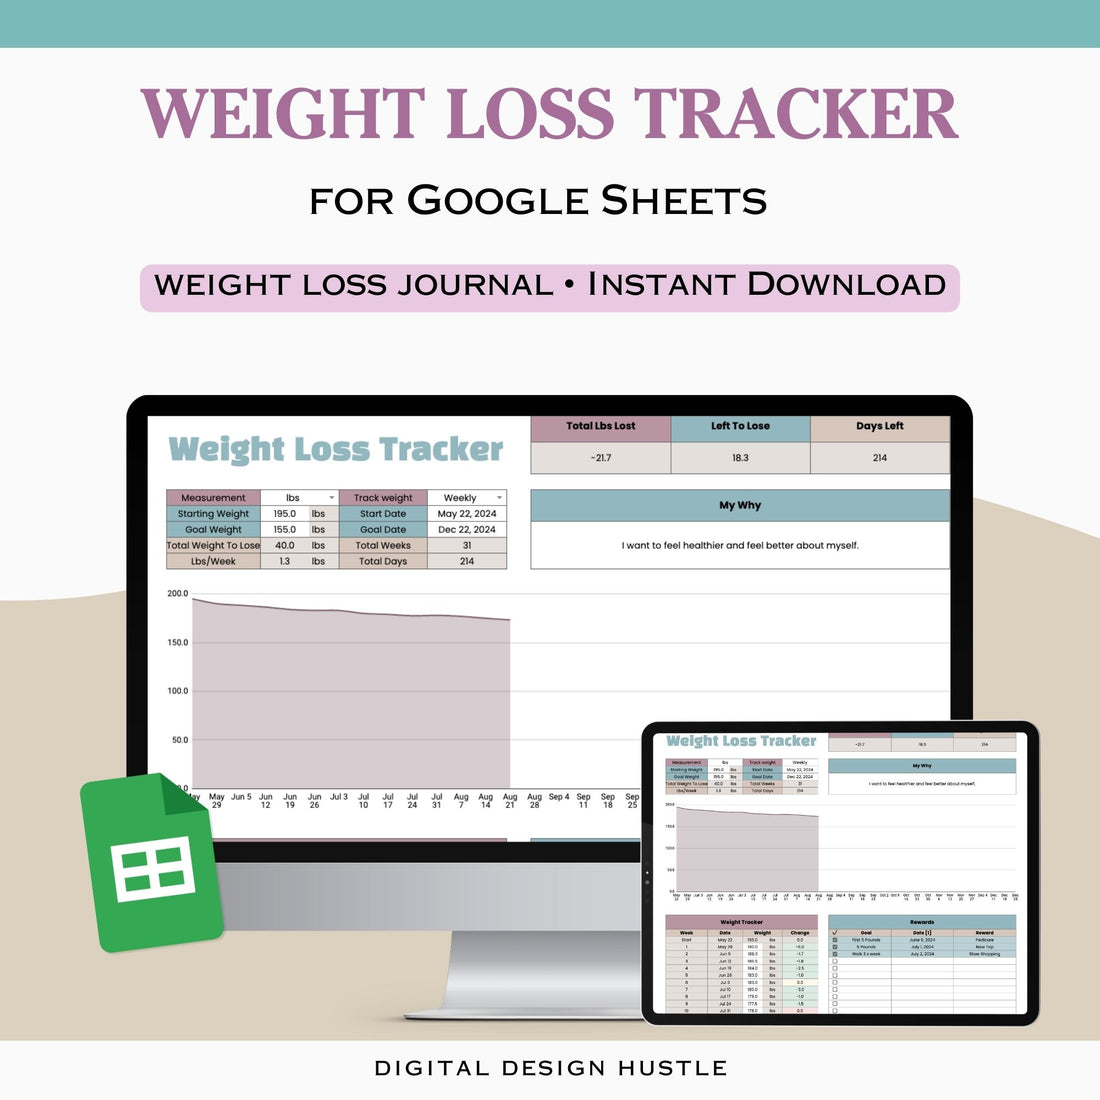 Weight Loss Tracker for Google Sheets